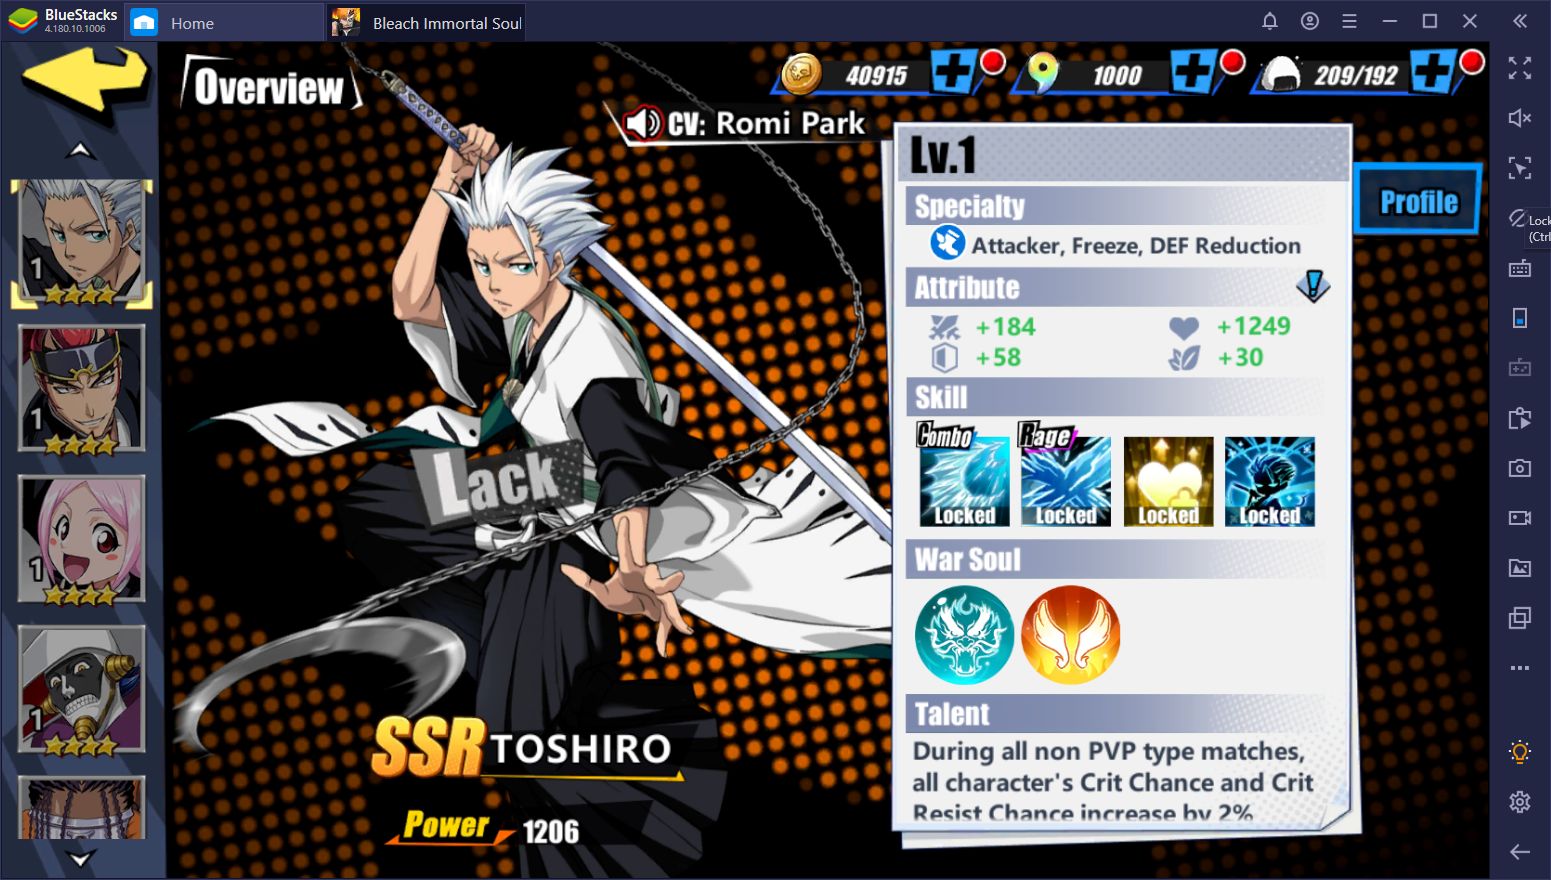 Tier List for Bleach: Immortal Soul on PC - The Best Characters You Can Summon